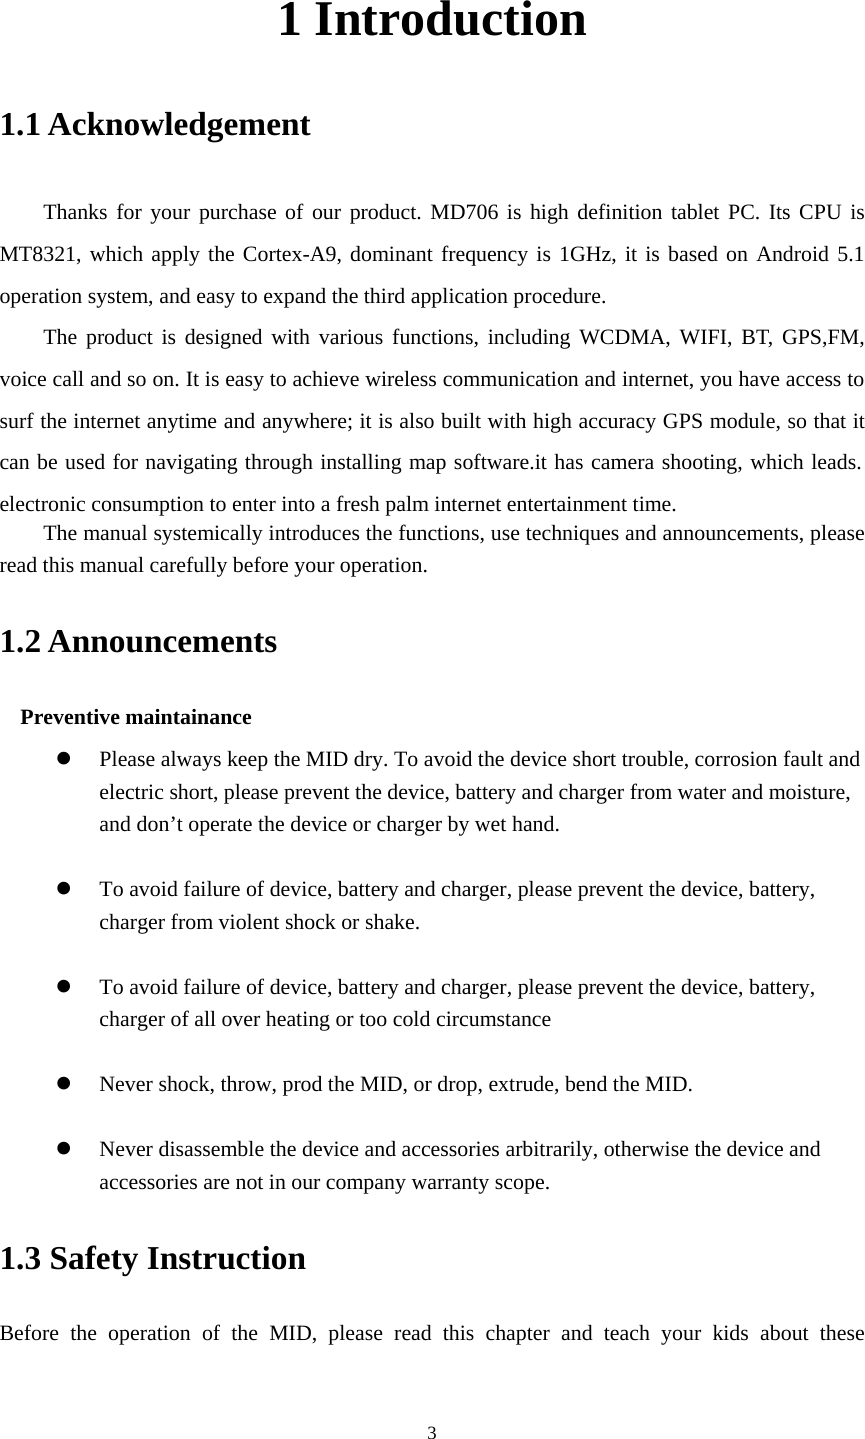     31 Introduction 1.1 Acknowledgement     Thanks for your purchase of our product. MD706 is high definition tablet PC. Its CPU is MT8321, which apply the Cortex-A9, dominant frequency is 1GHz, it is based on Android 5.1 operation system, and easy to expand the third application procedure. The product is designed with various functions, including WCDMA, WIFI, BT, GPS,FM, voice call and so on. It is easy to achieve wireless communication and internet, you have access to surf the internet anytime and anywhere; it is also built with high accuracy GPS module, so that it can be used for navigating through installing map software.it has camera shooting, which leads. electronic consumption to enter into a fresh palm internet entertainment time.   The manual systemically introduces the functions, use techniques and announcements, please read this manual carefully before your operation. 1.2 Announcements   Preventive maintainance   z Please always keep the MID dry. To avoid the device short trouble, corrosion fault and electric short, please prevent the device, battery and charger from water and moisture, and don’t operate the device or charger by wet hand.    z To avoid failure of device, battery and charger, please prevent the device, battery, charger from violent shock or shake.  z To avoid failure of device, battery and charger, please prevent the device, battery, charger of all over heating or too cold circumstance  z Never shock, throw, prod the MID, or drop, extrude, bend the MID.  z Never disassemble the device and accessories arbitrarily, otherwise the device and accessories are not in our company warranty scope. 1.3 Safety Instruction     Before the operation of the MID, please read this chapter and teach your kids about these 